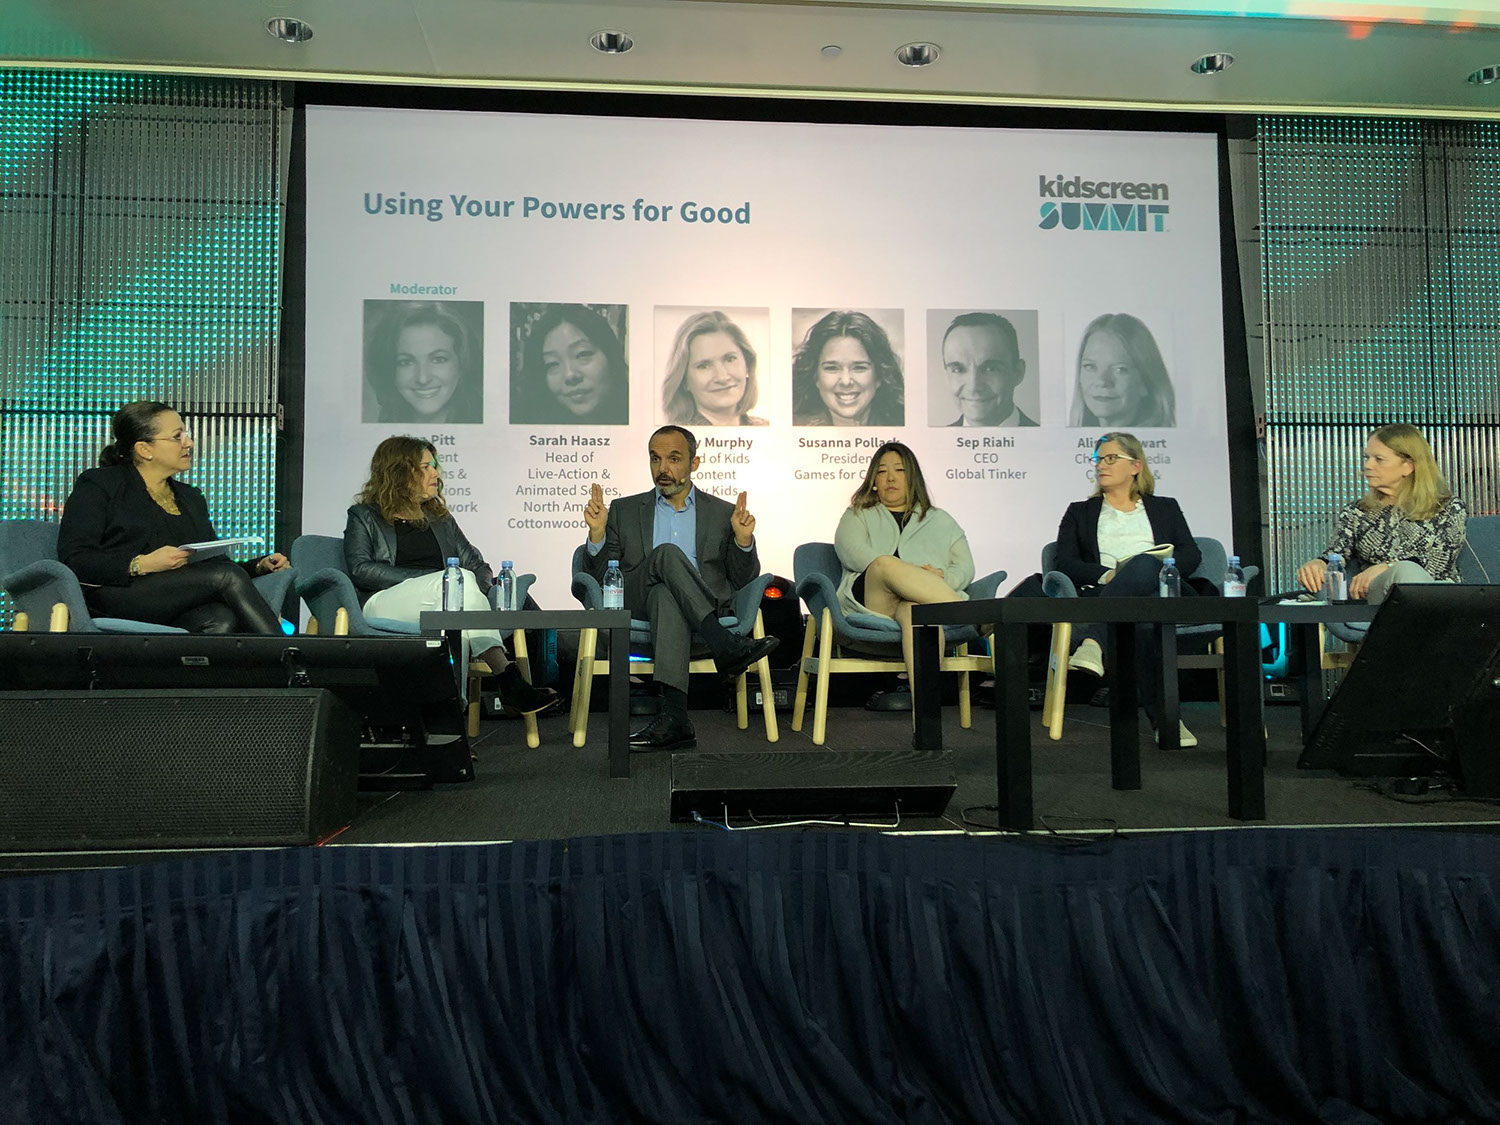 GLOBAL TINKER’S SEP RIAHI ON THE 2019 KIDSCREEN SUMMIT PANEL “USING YOUR POWERS FOR GOOD”, ALONGSIDE COMPANIES CARTOON NETWORK, GAMES FOR CHANGE, FEDERATION KIDS AND FAMILY, AND SKY KIDS (MIAMI 2019)